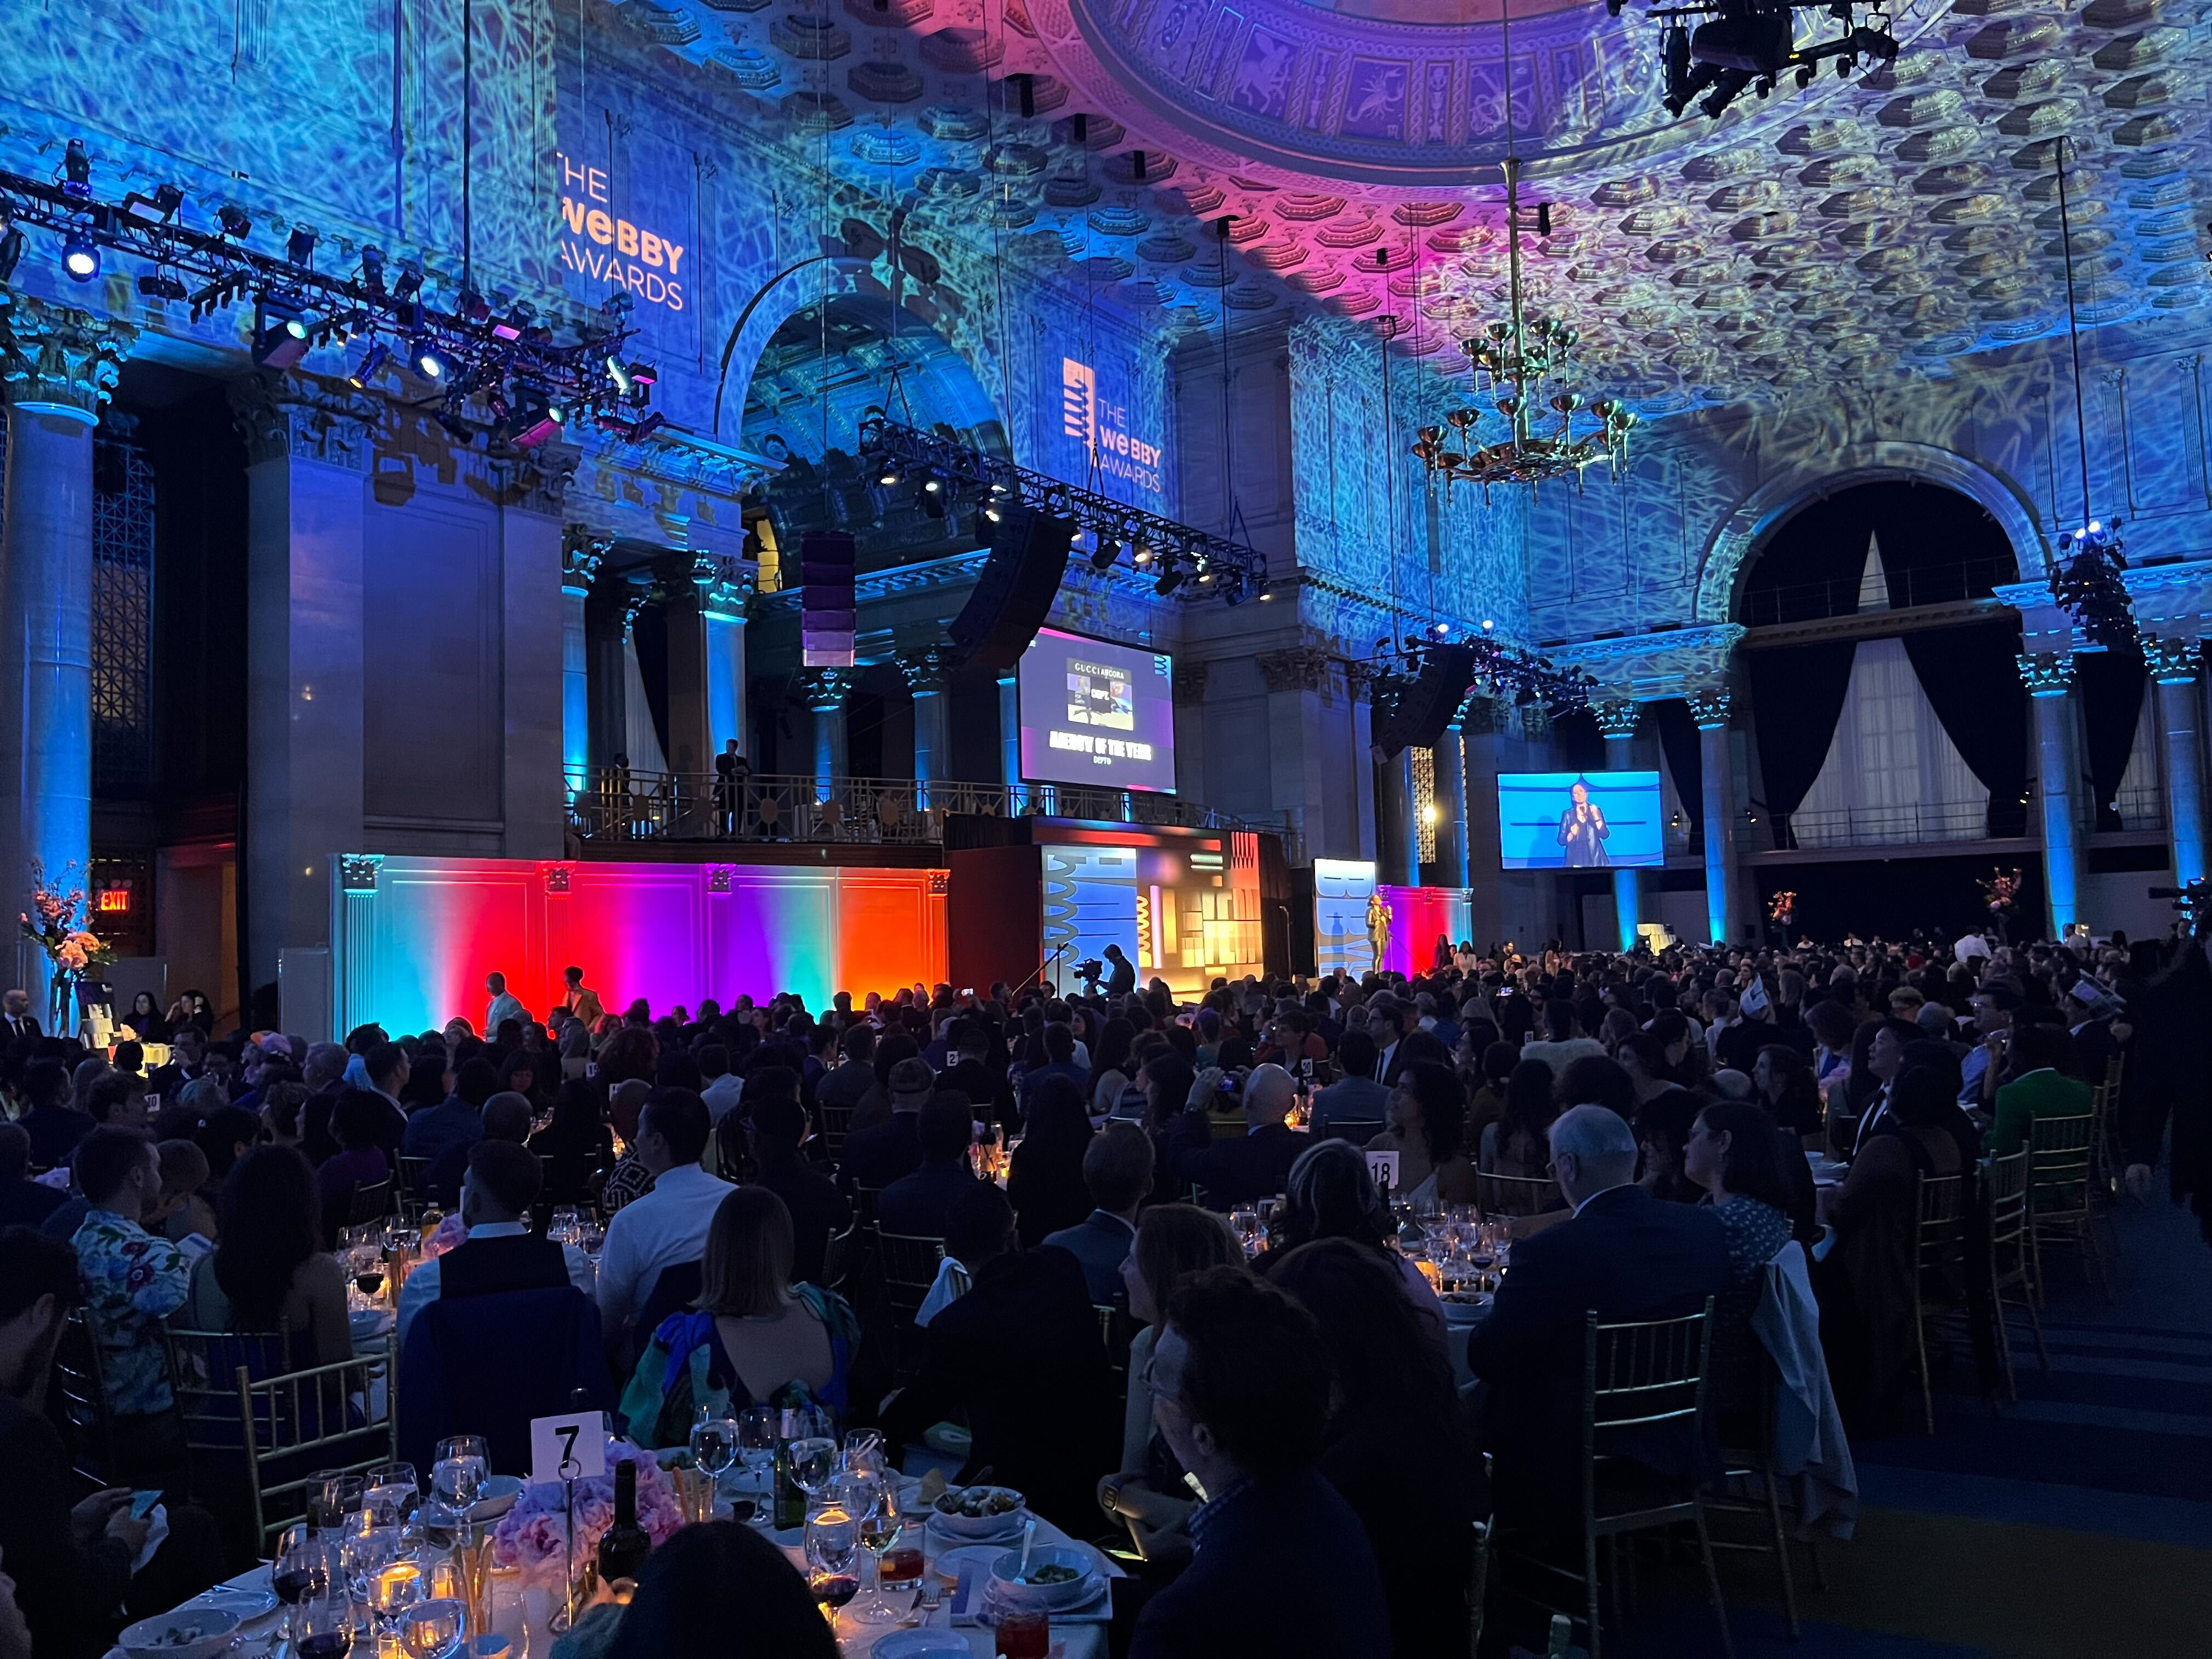 Photo captured during the Webby Award Ceremony in NYC showing the stage and dinner guests.